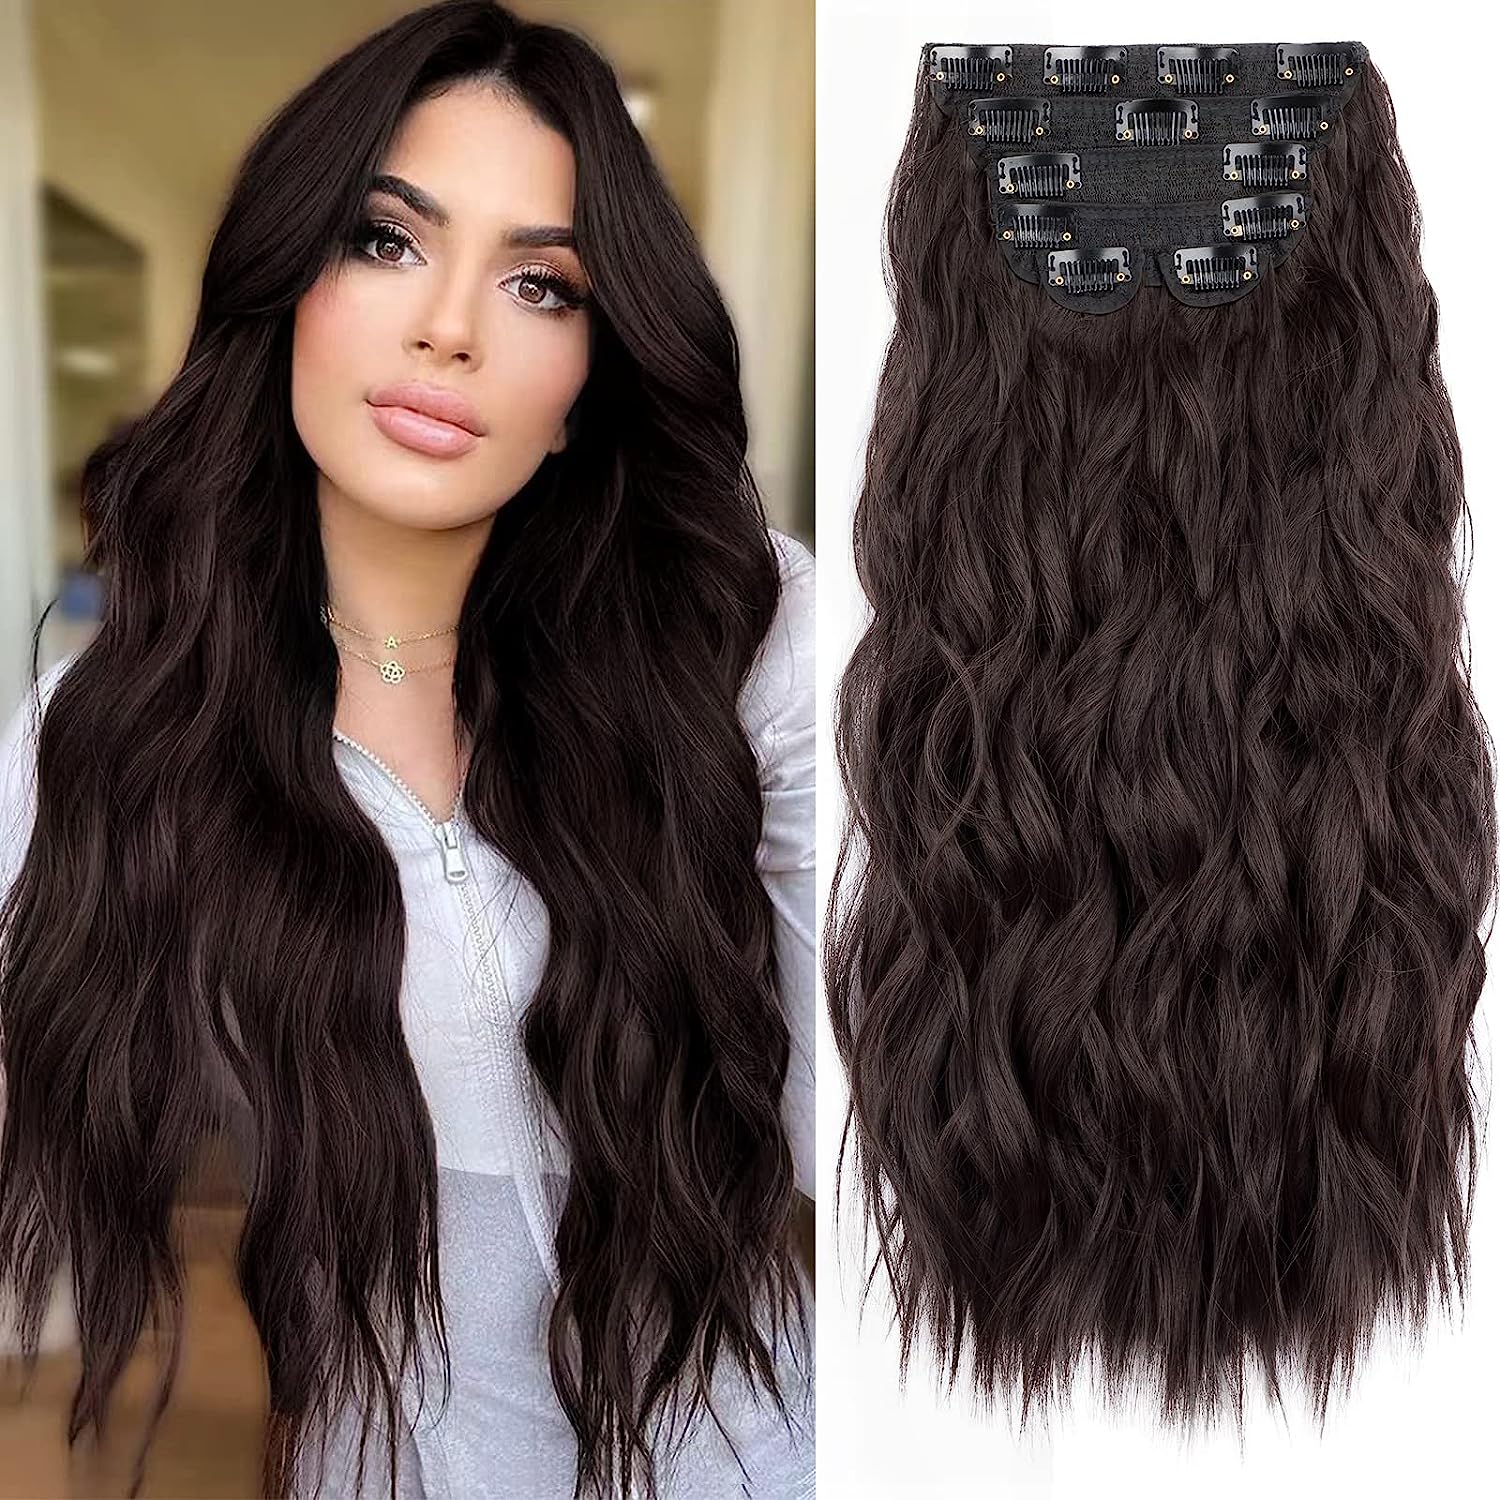 Clip in Synthetic Hair Extensions Long Wavy 6PCS Thick [...]